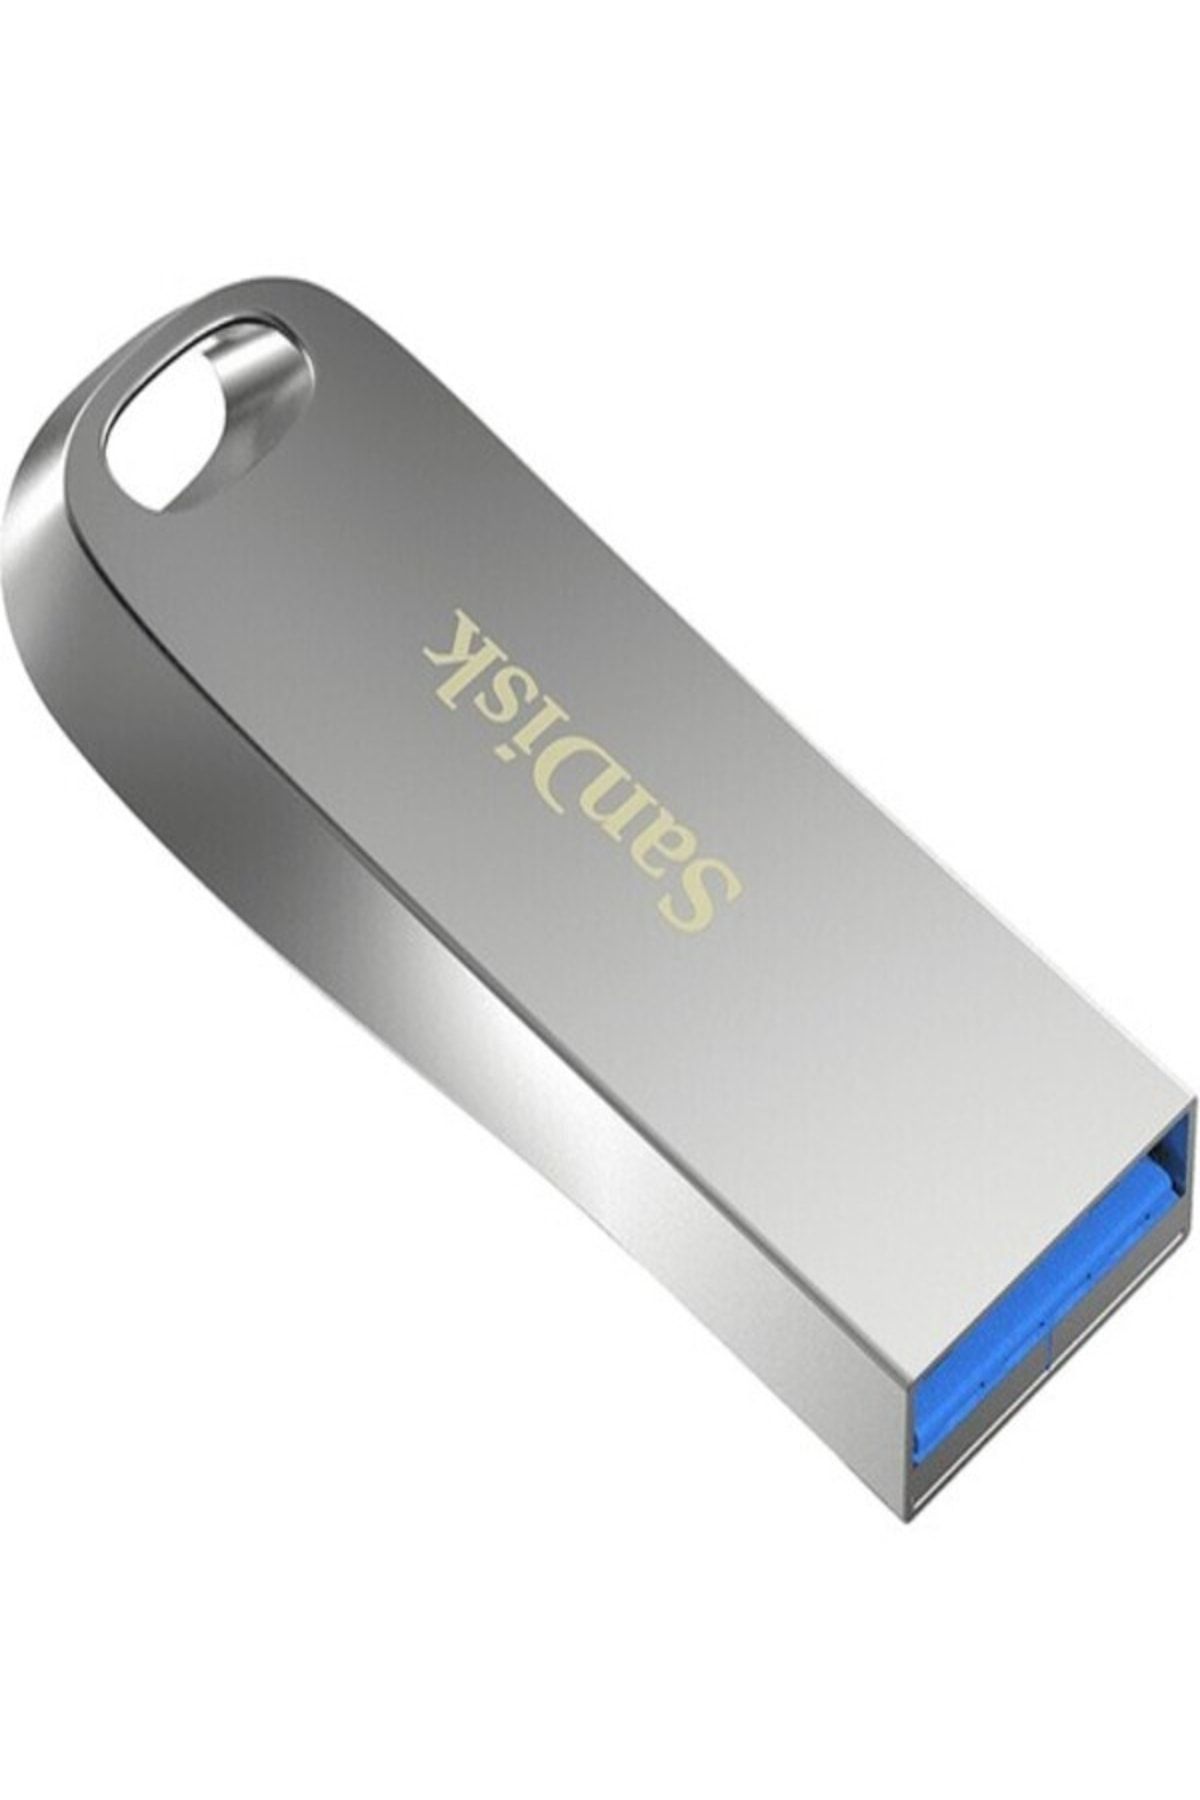 Sandisk Ultra Luxe 128gb Usb 3.1 150mb/s (sdcz74-128g-g46)